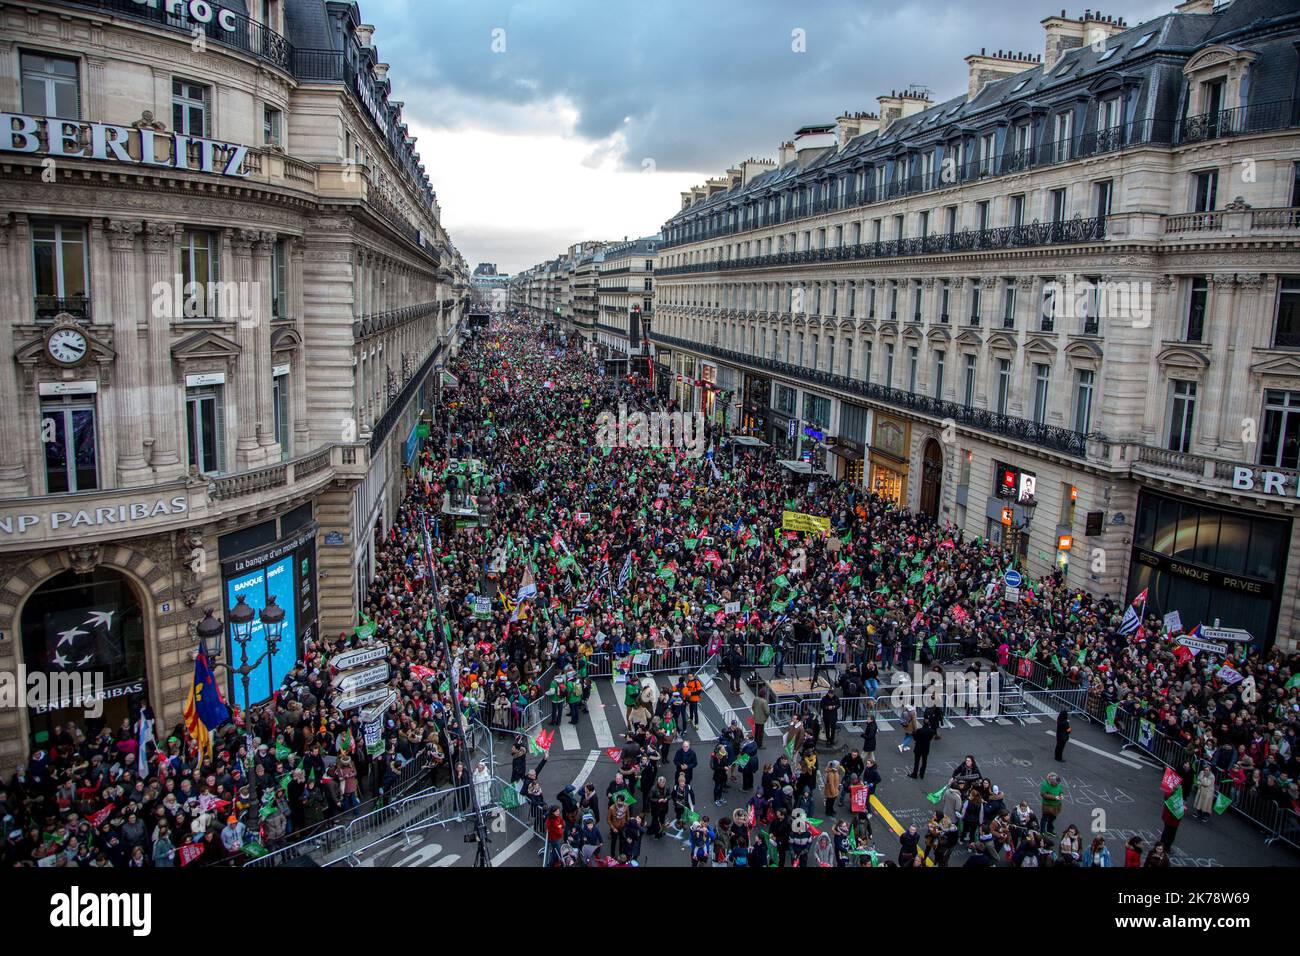 France / Ile-de-France (region) / Paris  -  ANTI MAR (Medically Assisted Reproduction) demonstration in Paris Stock Photo